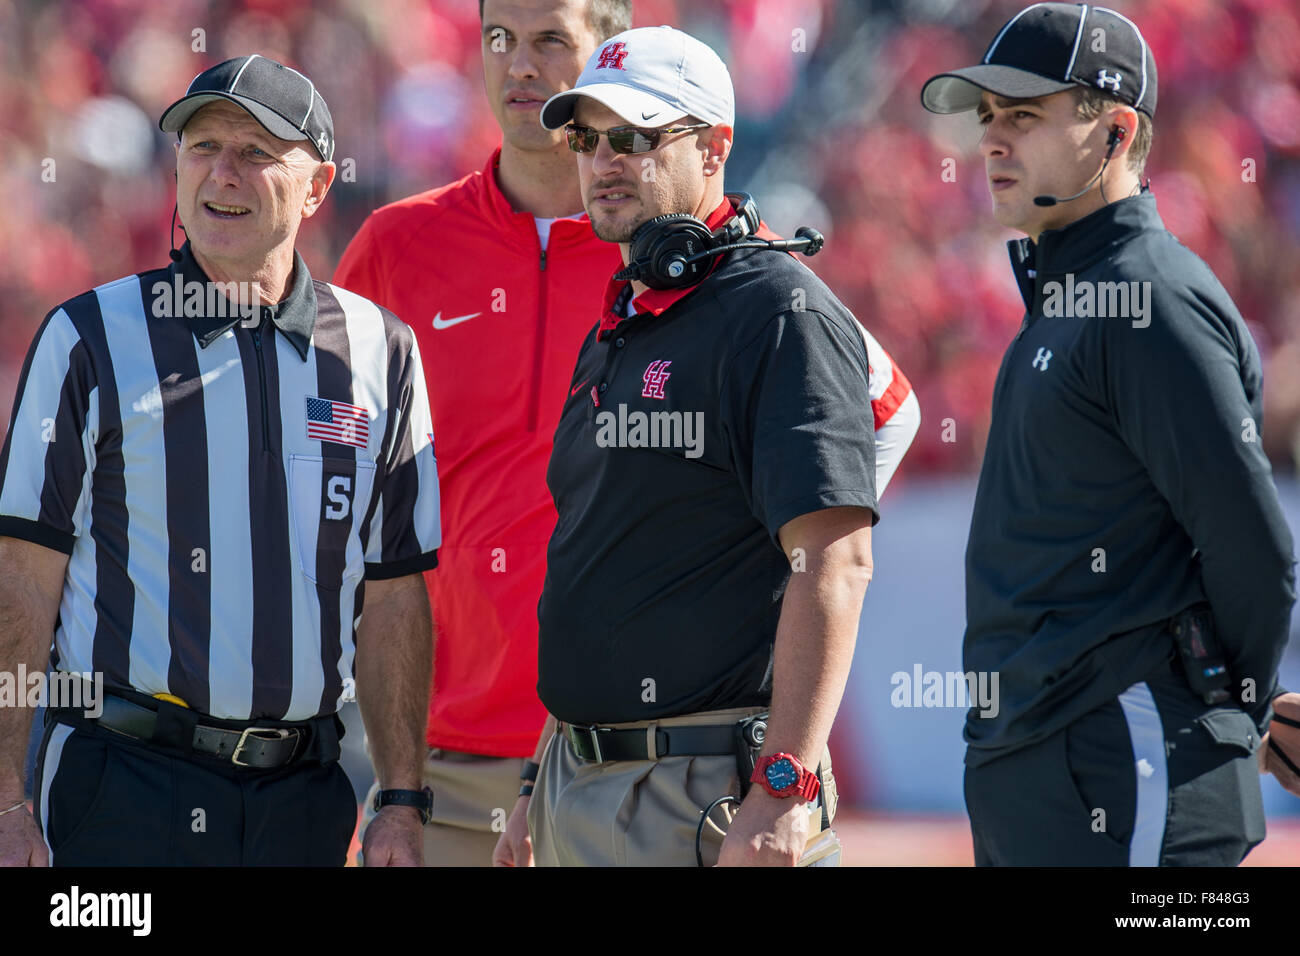 Houston, TX, USA. 5th Dec, 2015. Houston Cougars head coach Tom Herman during the 1st quarter of the American Athletic Conference championship NCAA football game between the Temple Owls and the University of Houston Cougars at TDECU Stadium in Houston, TX.Trask Smith/CSM/Alamy Live News Stock Photo